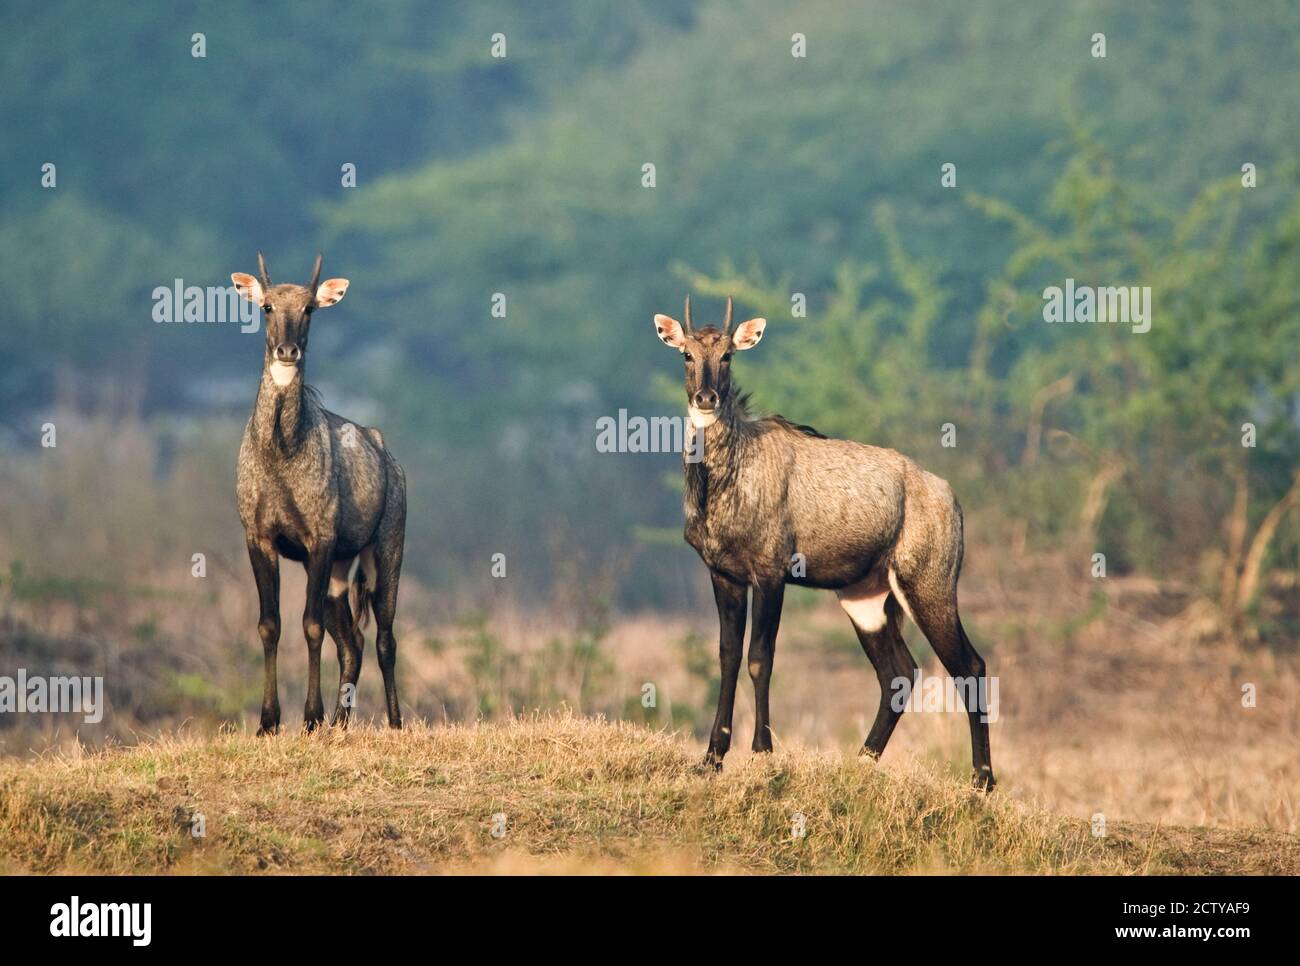 Two Nilgai (Boselaphus tragocamelus) standing in a forest, Keoladeo National Park, Rajasthan, India Stock Photo